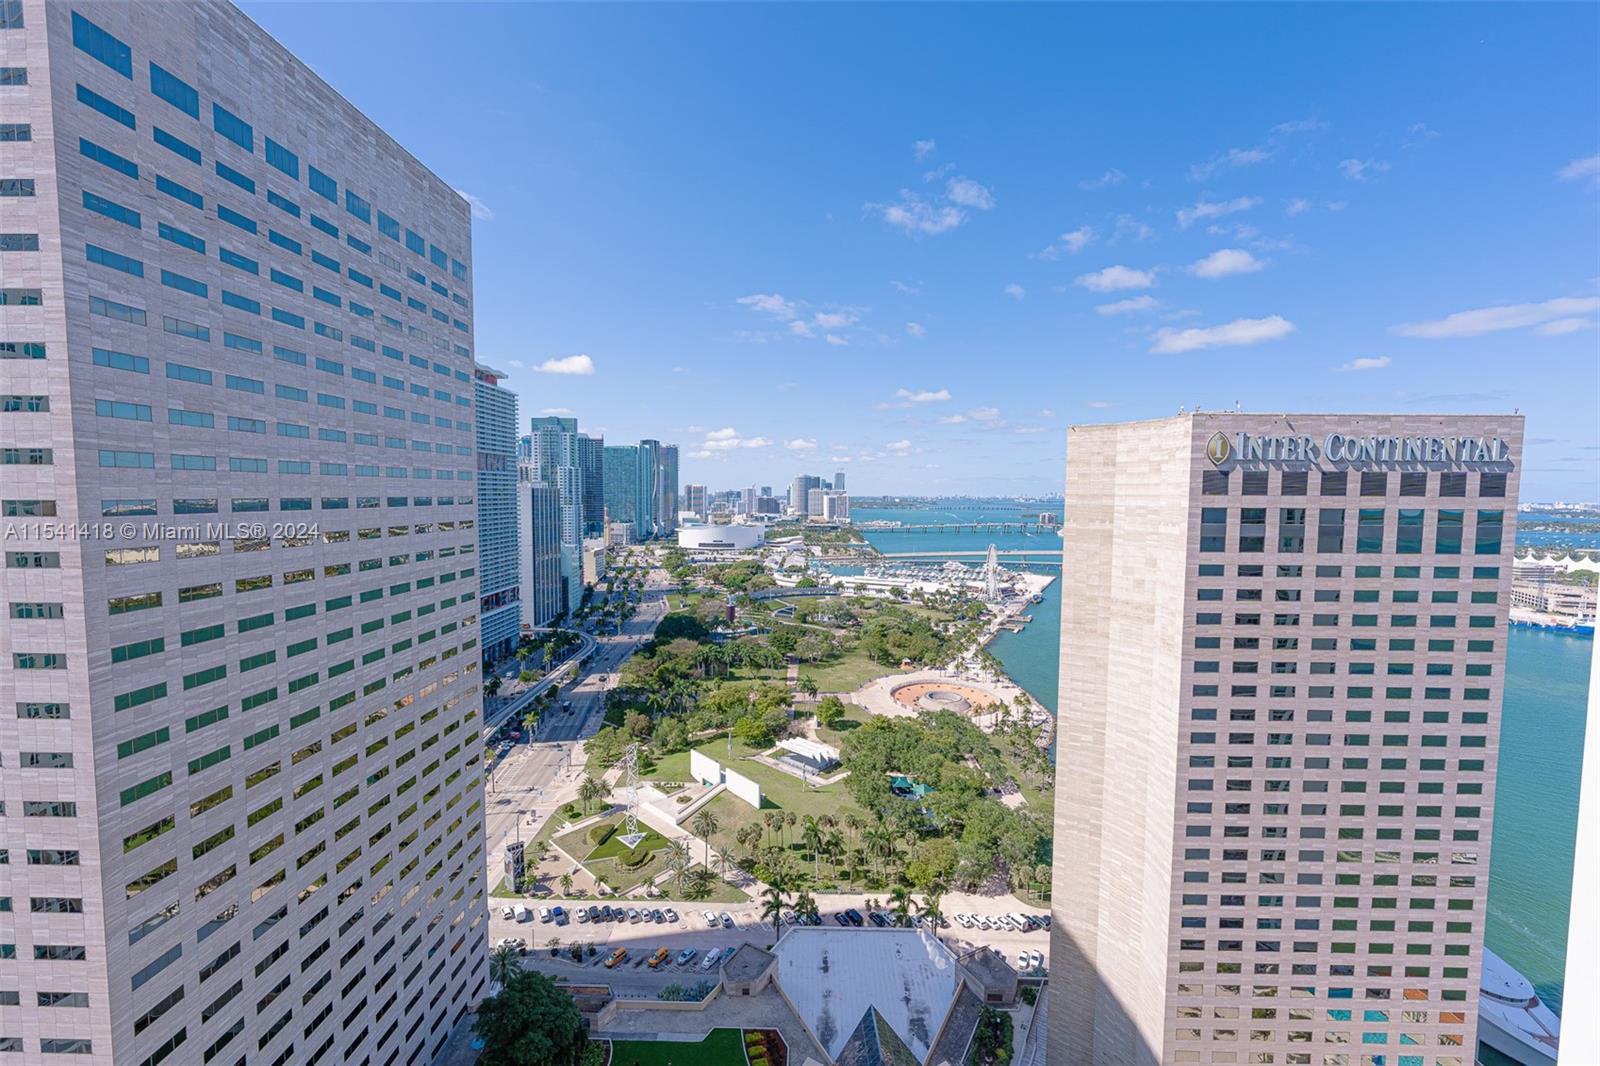 Beautiful furnished 1bd 1bth condo with direct views of Biscayne Bay, Bayfront Park and Miami Skyline. Condo incl: Kitchen, wood floors throughout, 2 Swimming pools, Jacuzzi, Sun Deck, 2 Party Rooms, 2 Fitness Centers, Conf. Rm., Convenience Store, 24/7 Security, Valet and concierge. Centrally located within minutes to SoBe, Grove, Gables, Brickell, Key Biscayne, Design District, Health District and Airport.